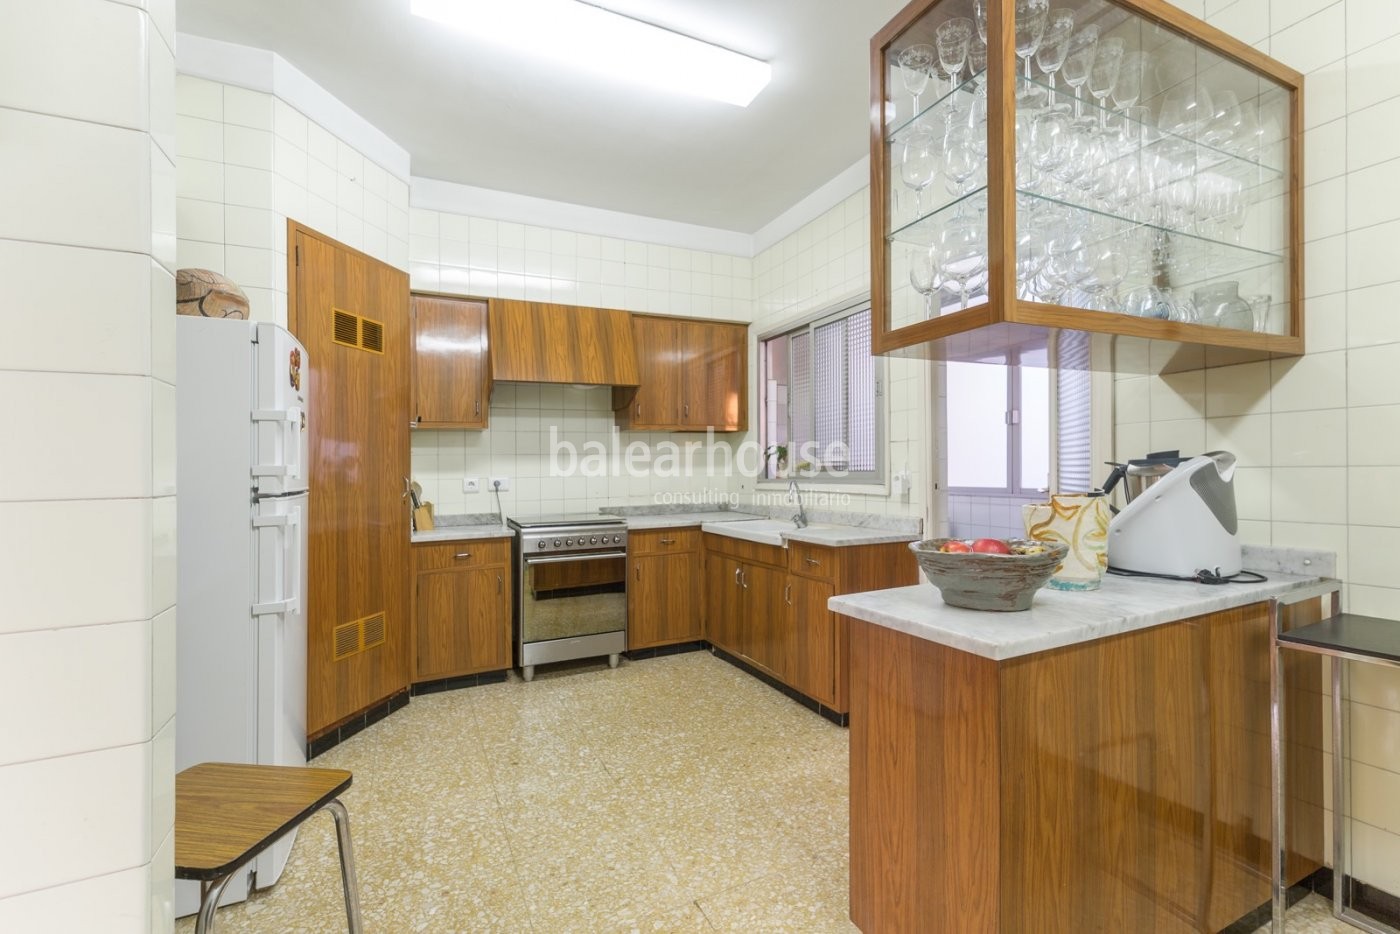 Fantastic spacious flat with great open views in the excellent location of Paseo Mallorca.